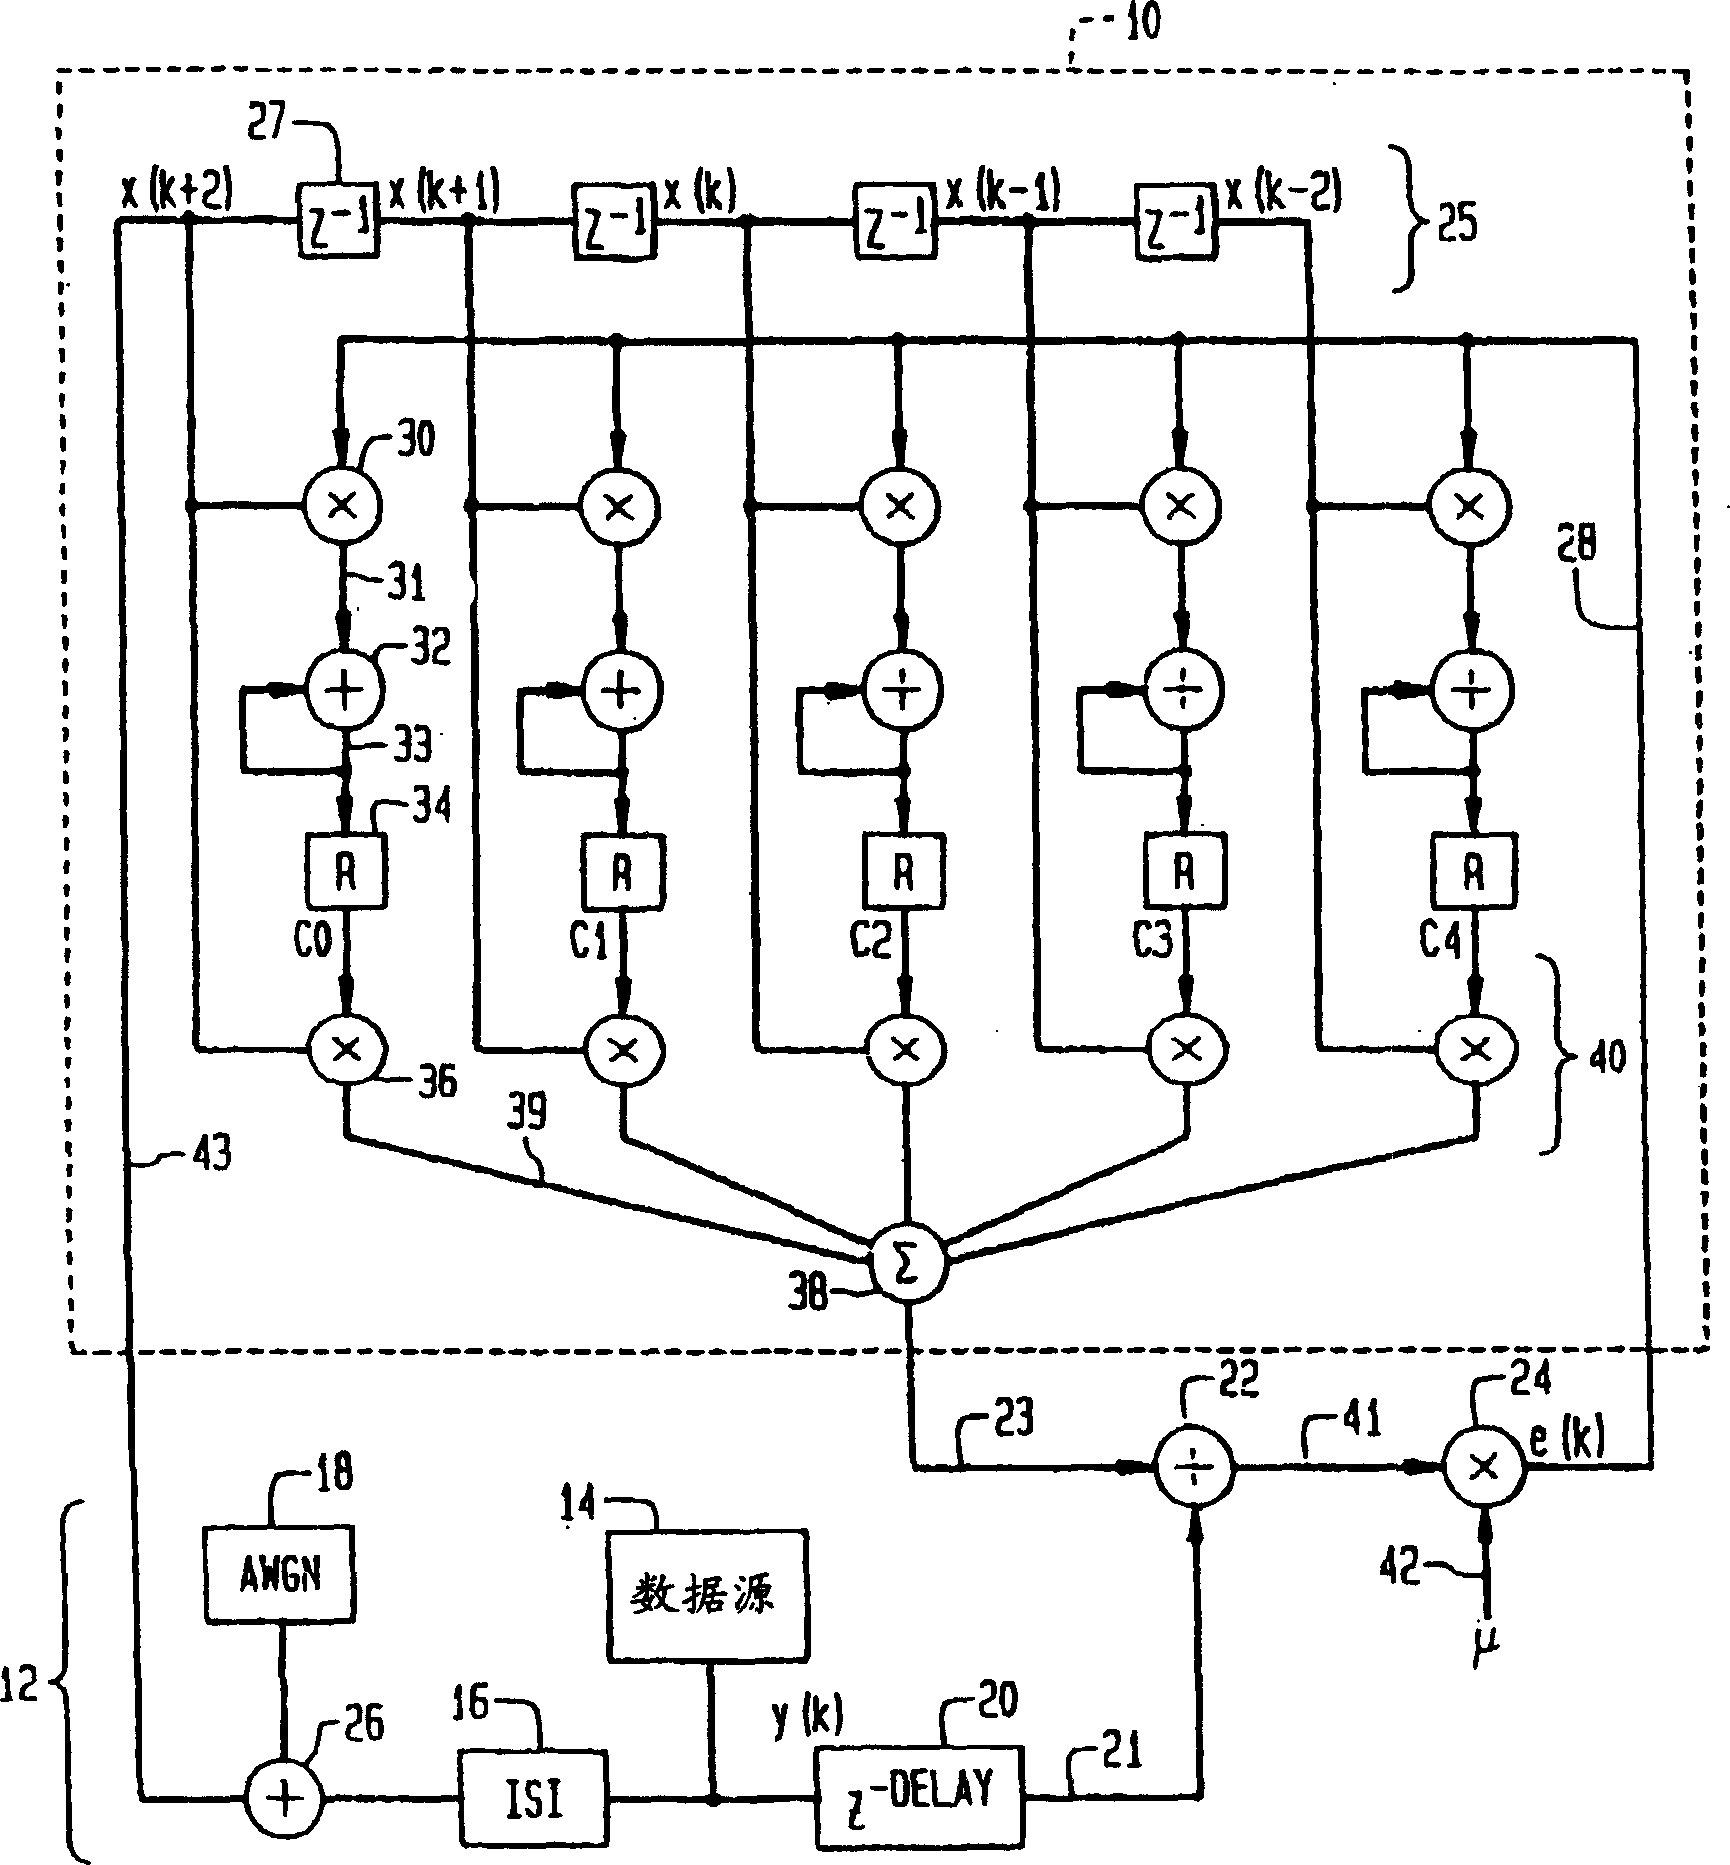 Parallel-serial multiplication-addition device